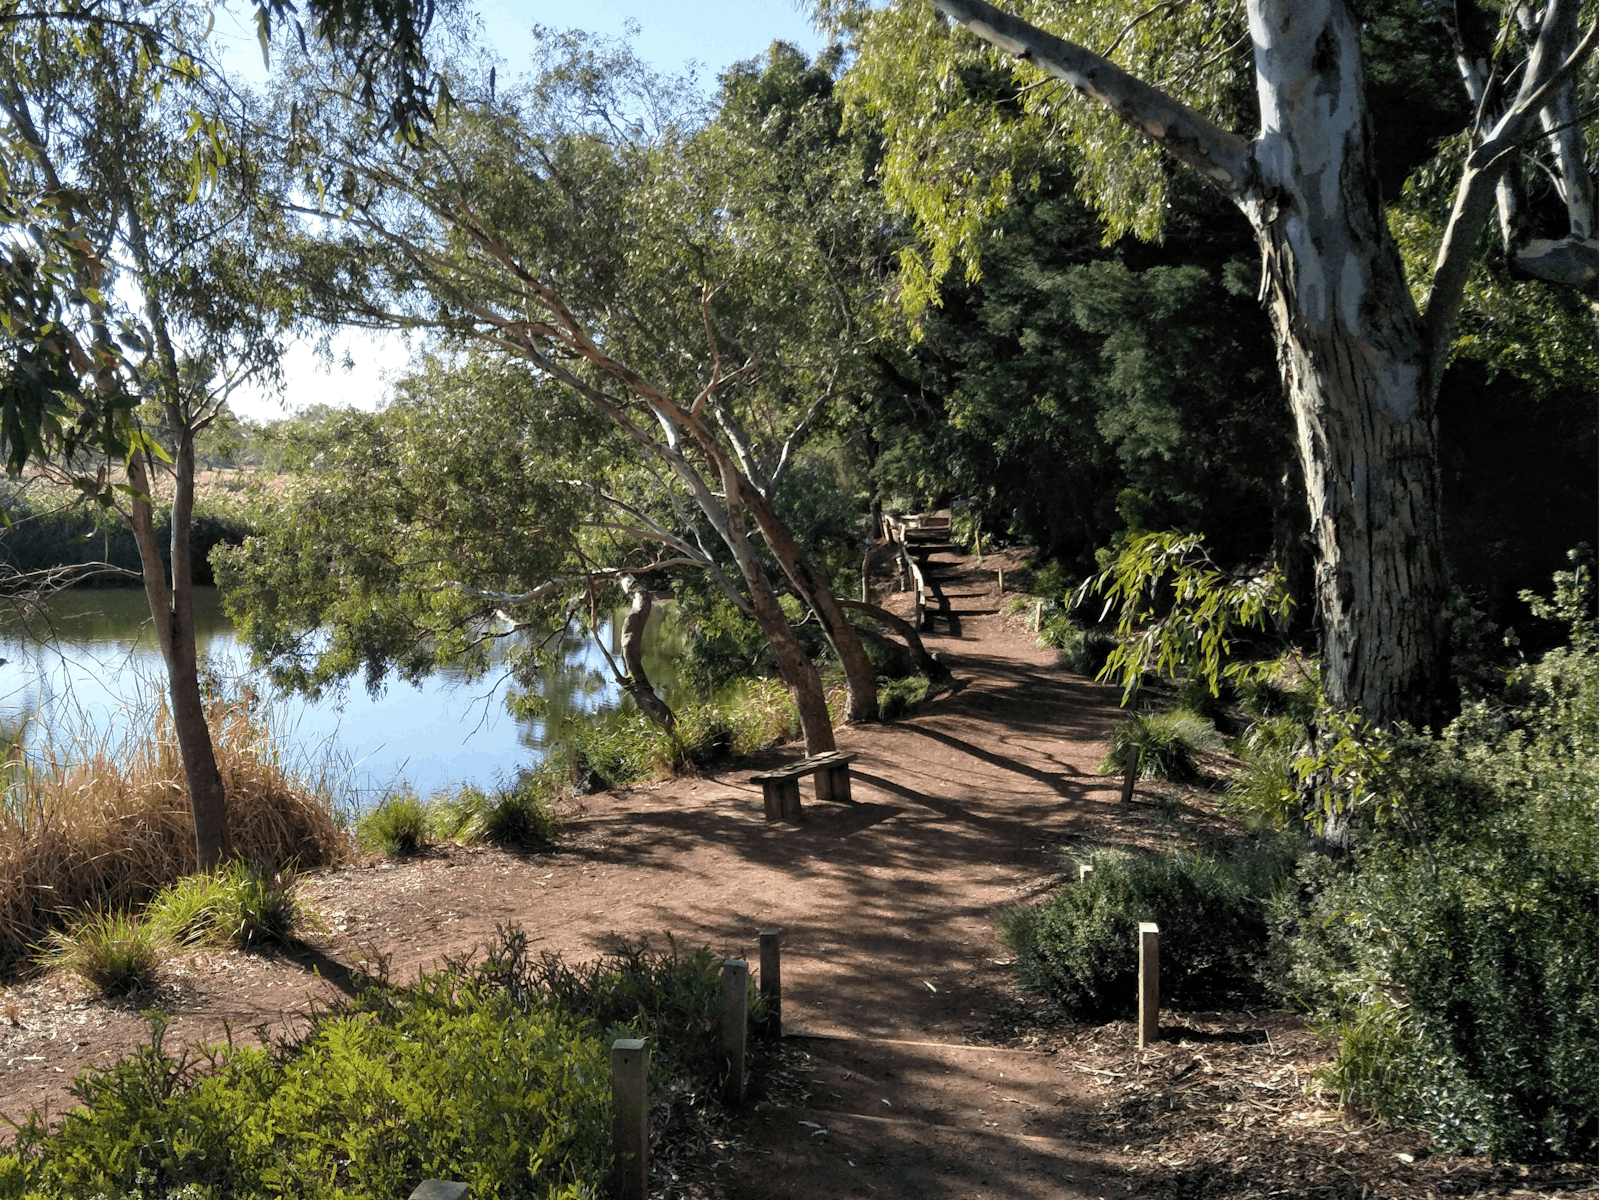 Lower path along Hovells Creek with serene views of the water.